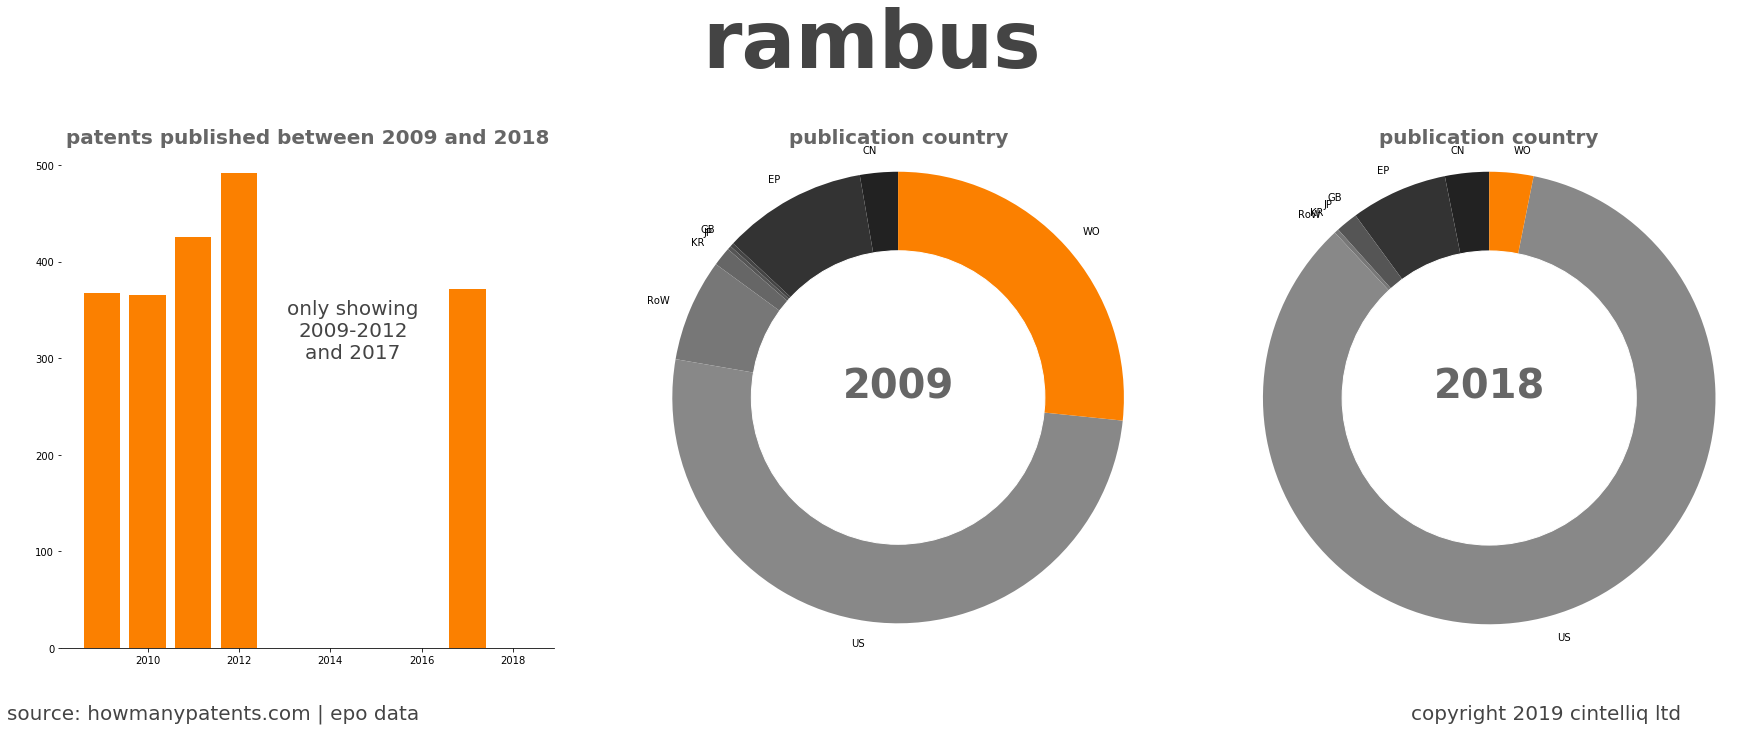 summary of patents for Rambus